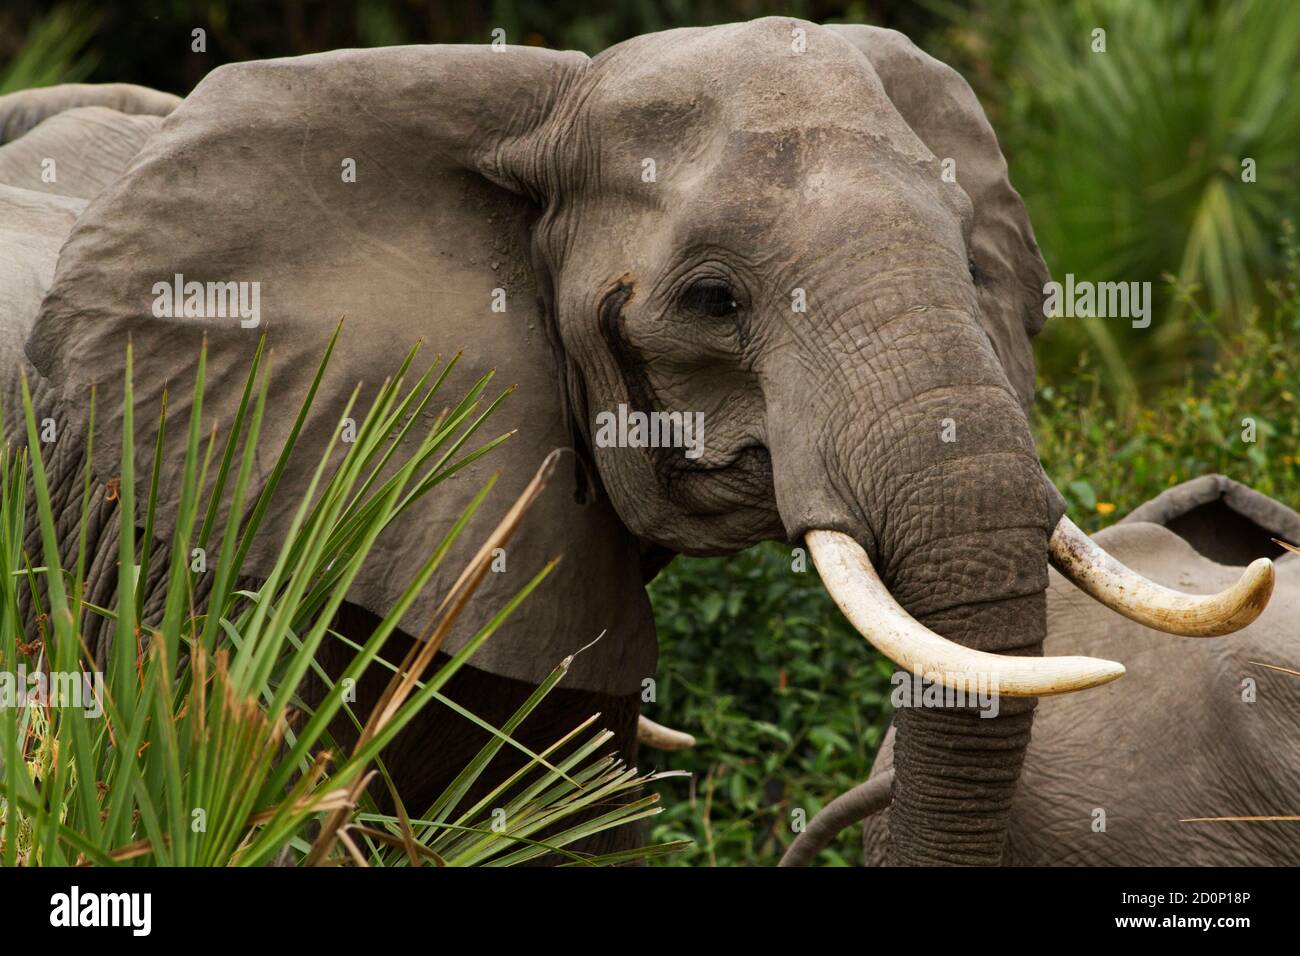 The temporal gland can often be seen, as with this matriarch, and is often a sign of excitement. With elephants this can be from social interaction Stock Photo